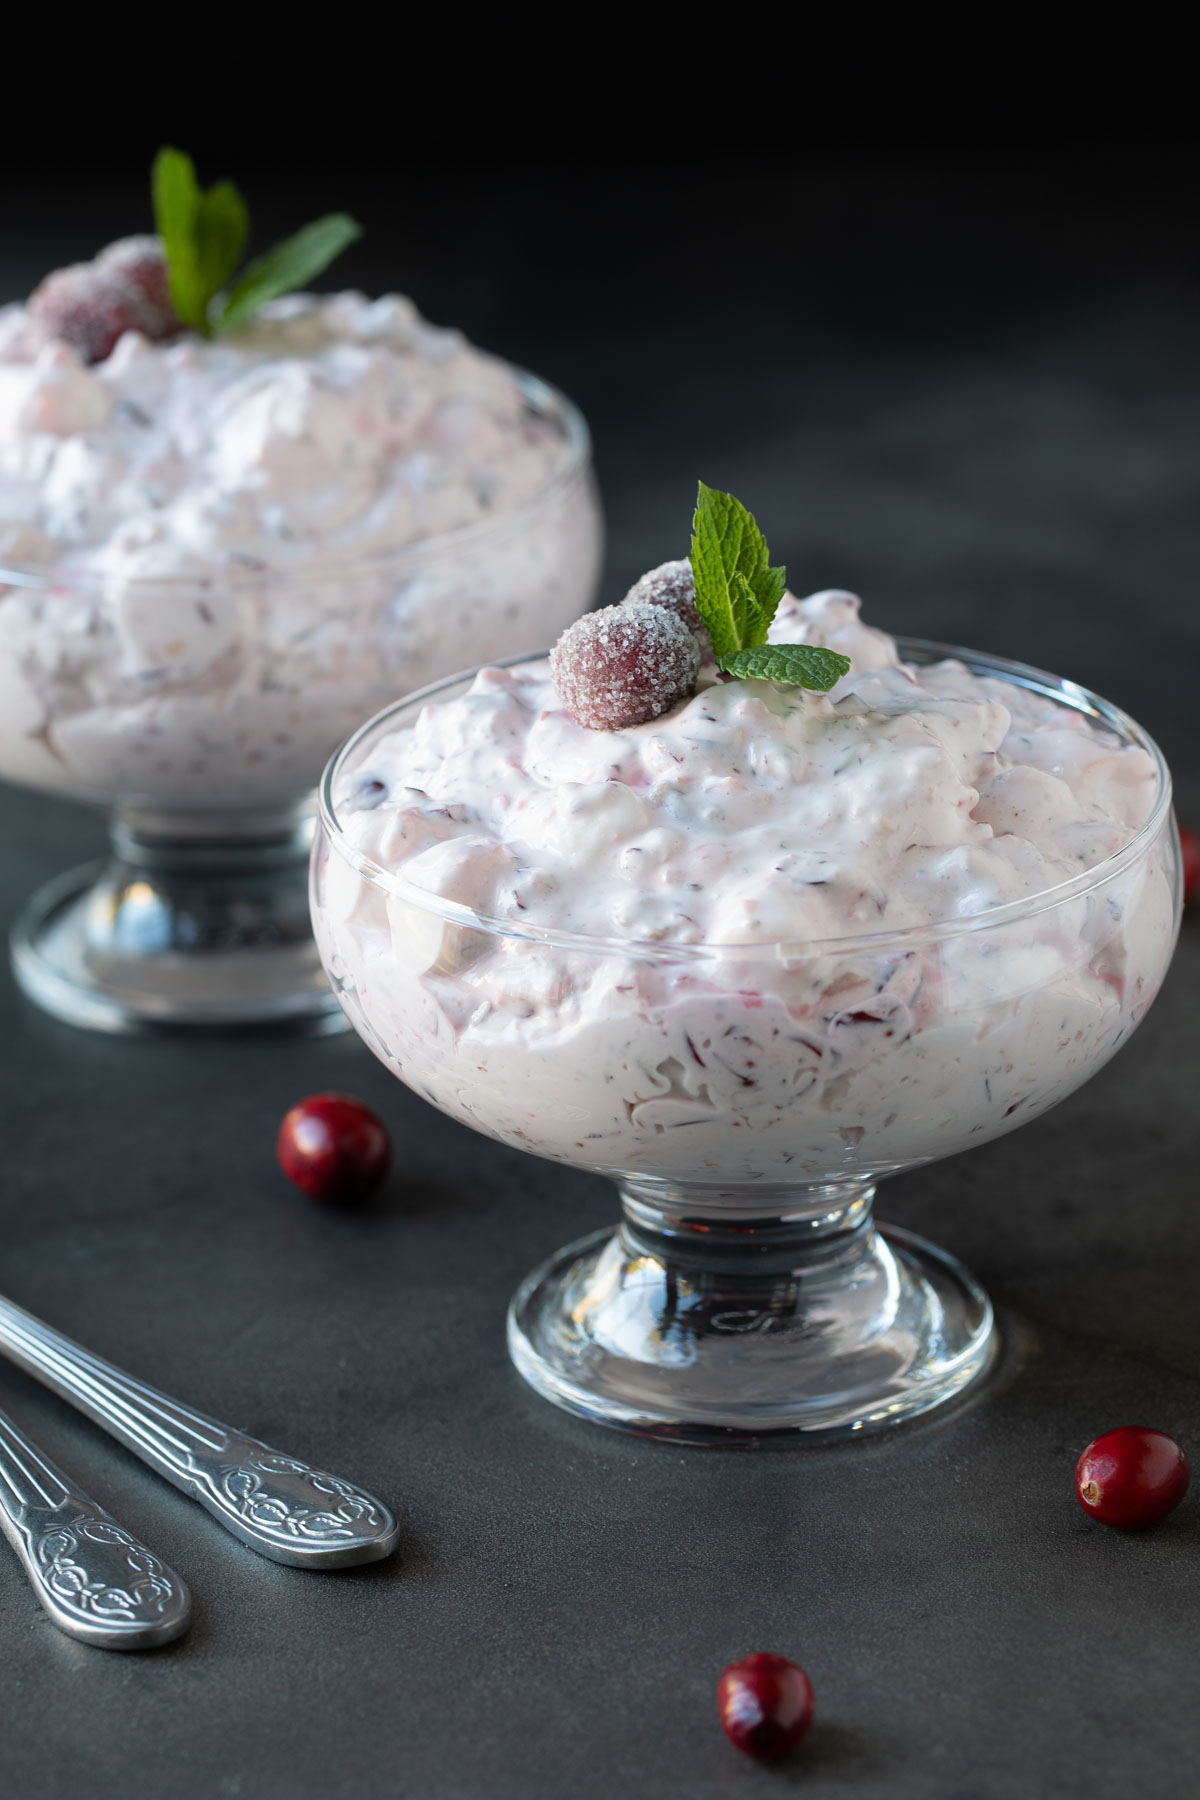 Cranberry fluff salad in two glass dessert bowls on a dark surface.